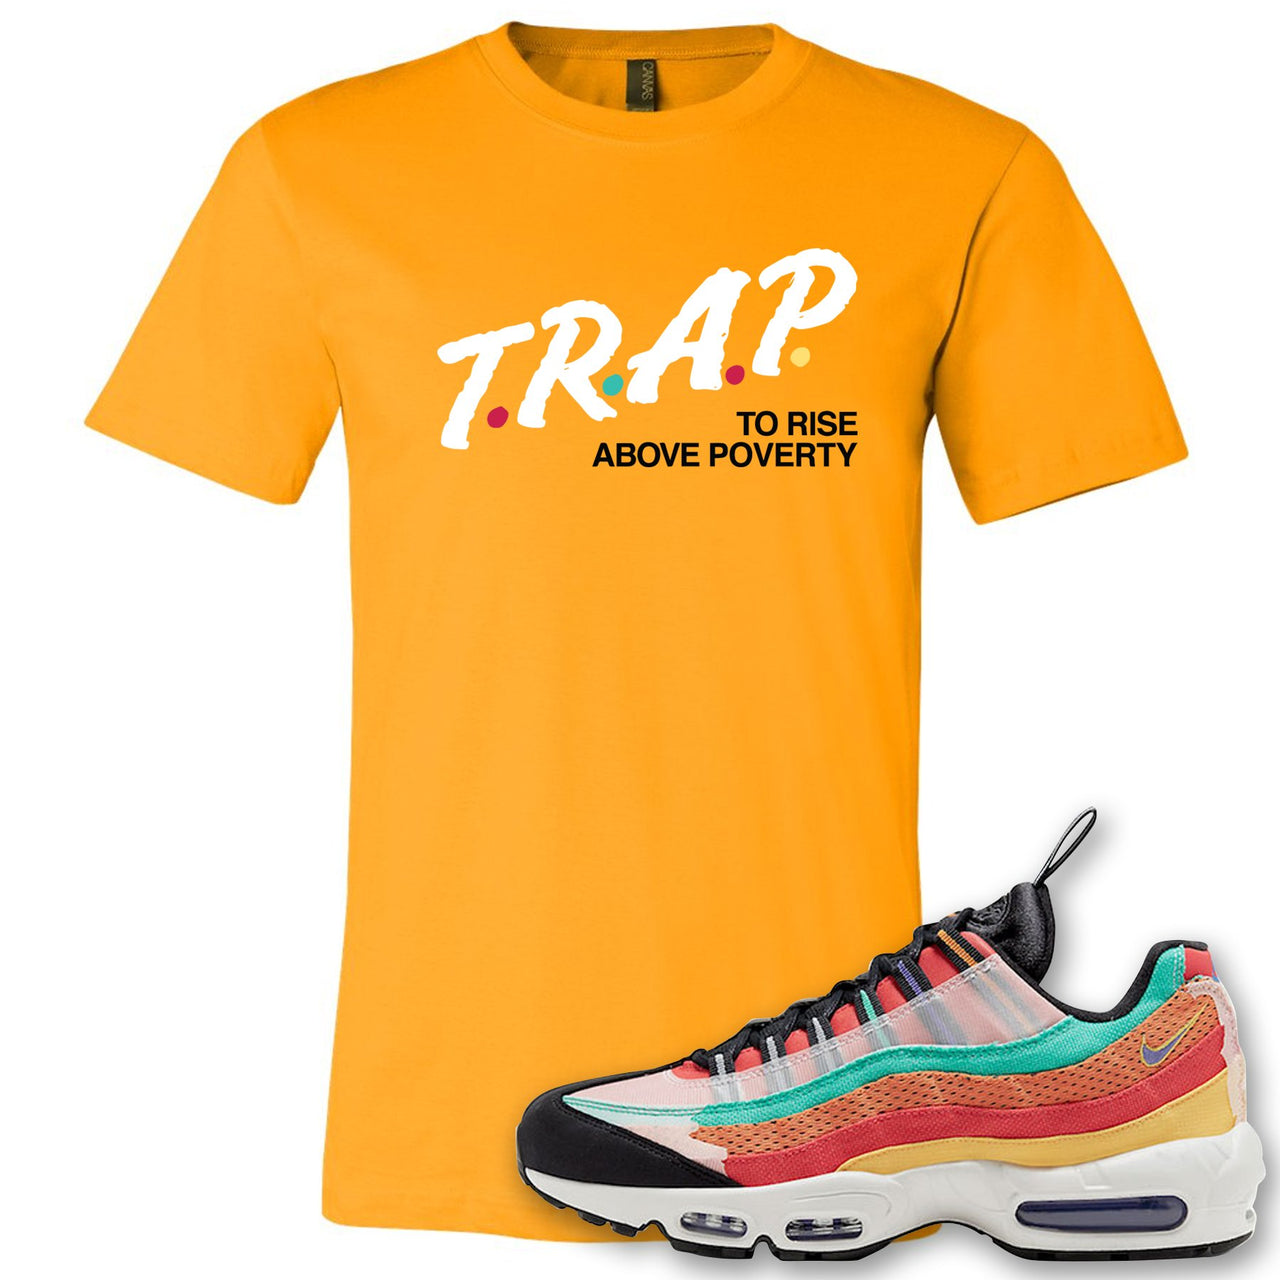 Air Max 95 Black History Month Sneaker Gold T Shirt | Tees to match Nike Air Max 95 Black History Month Shoes | Trap To Rise Above Poverty